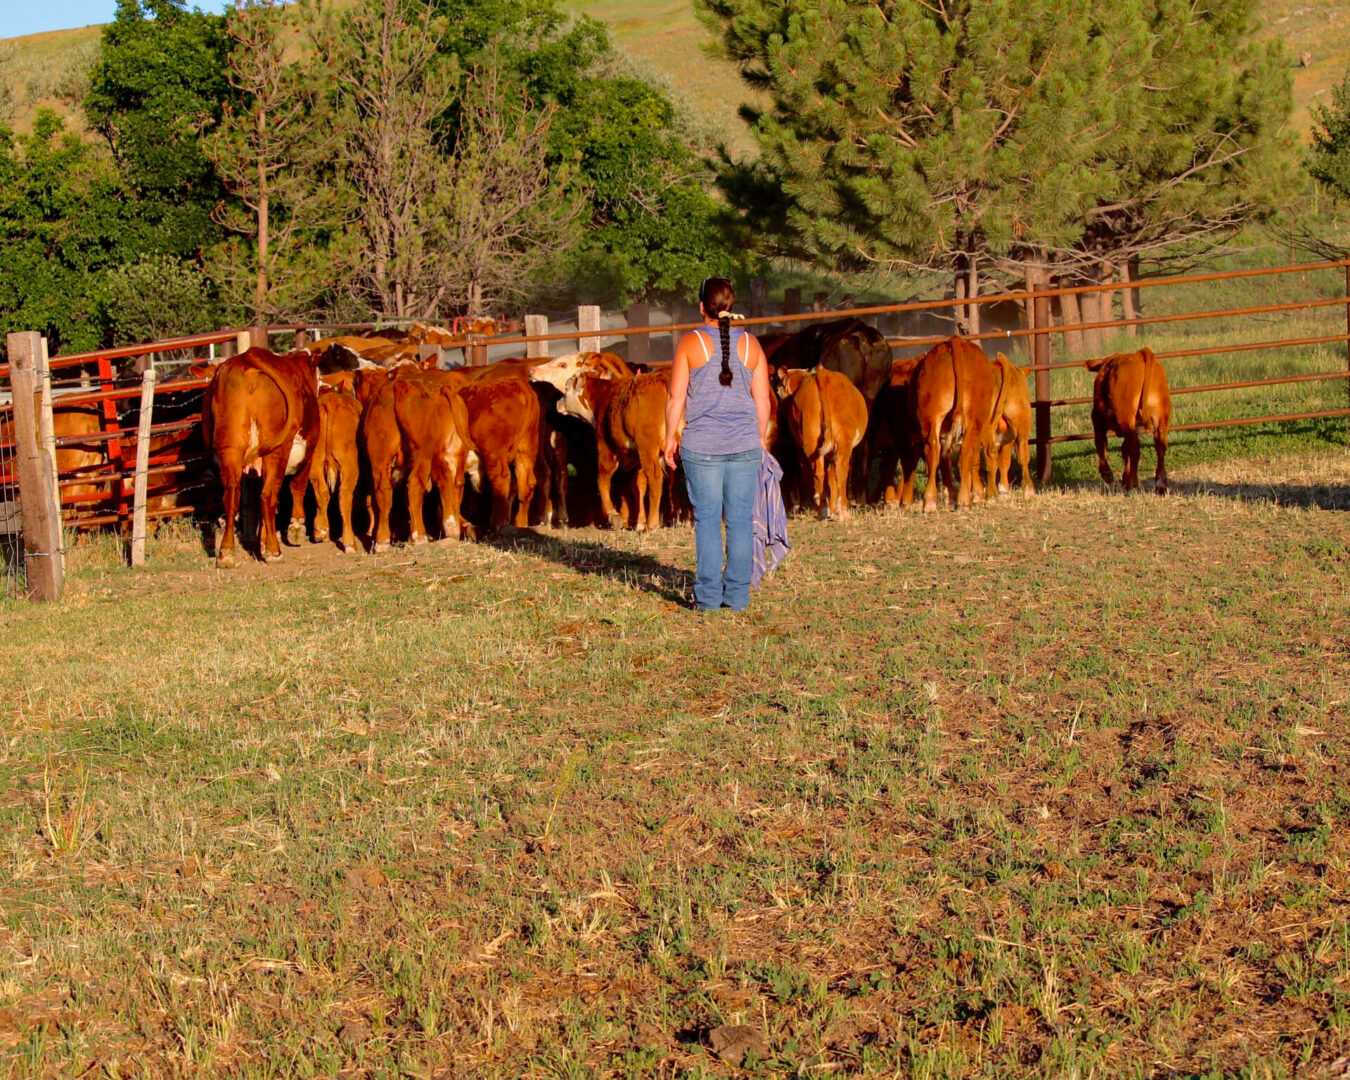 A woman standing near the cattle